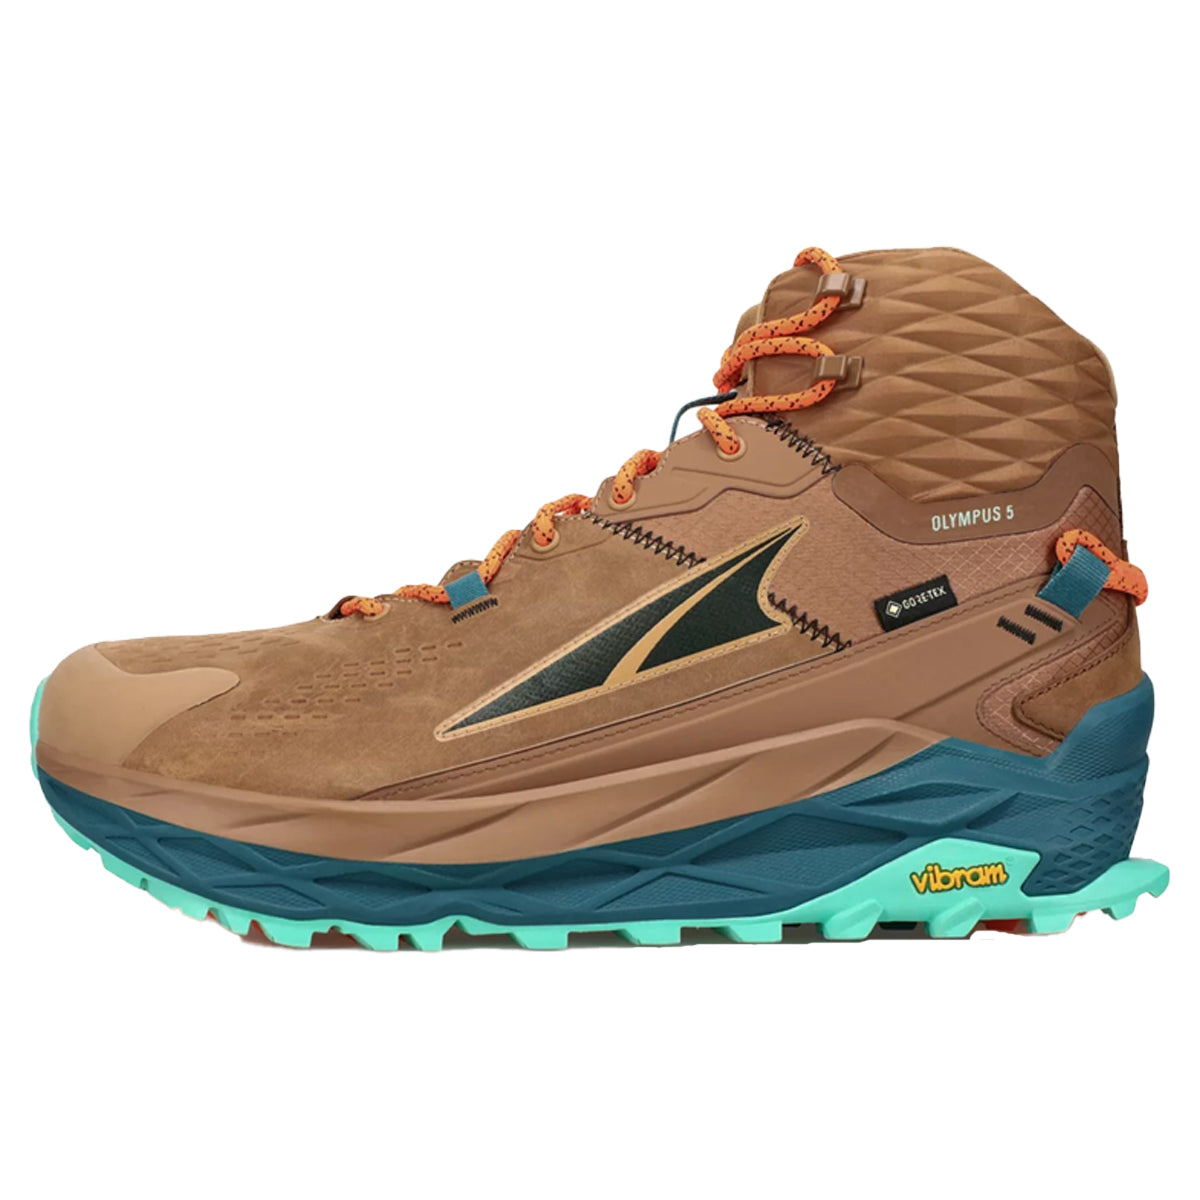 Altra Olympus 5 Hike Mid GTX in Brown by GOHUNT | Altra - GOHUNT Shop